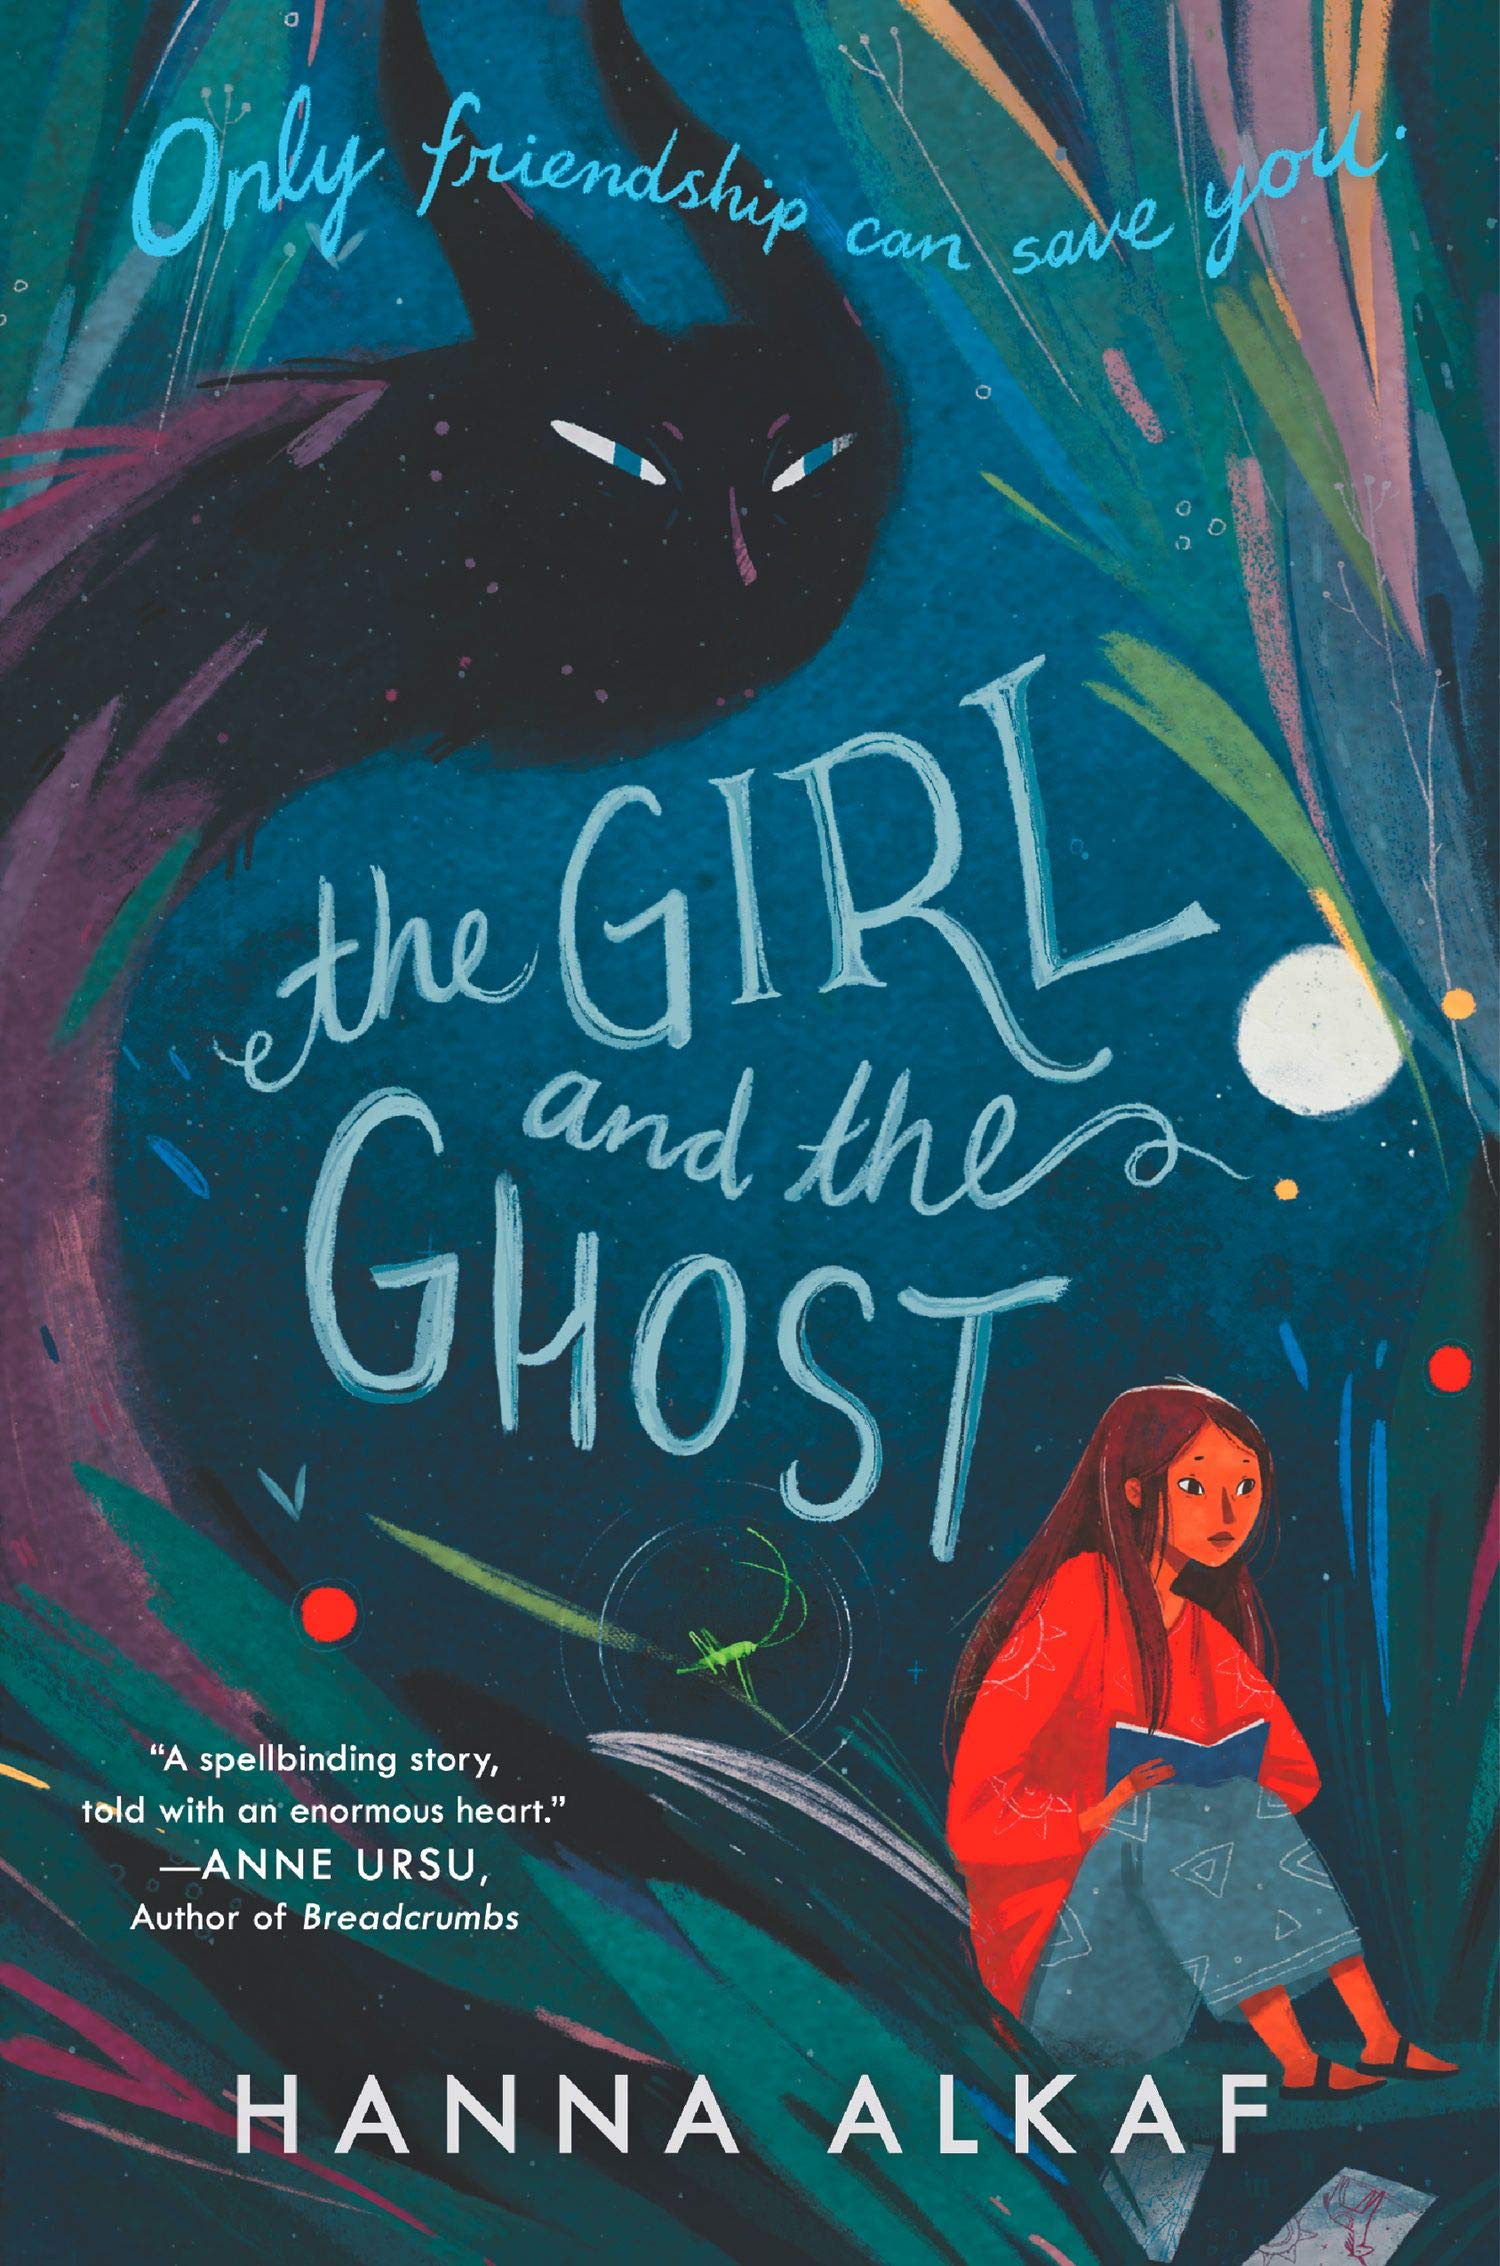 The Girl and the Ghost by Hanna Alkaf